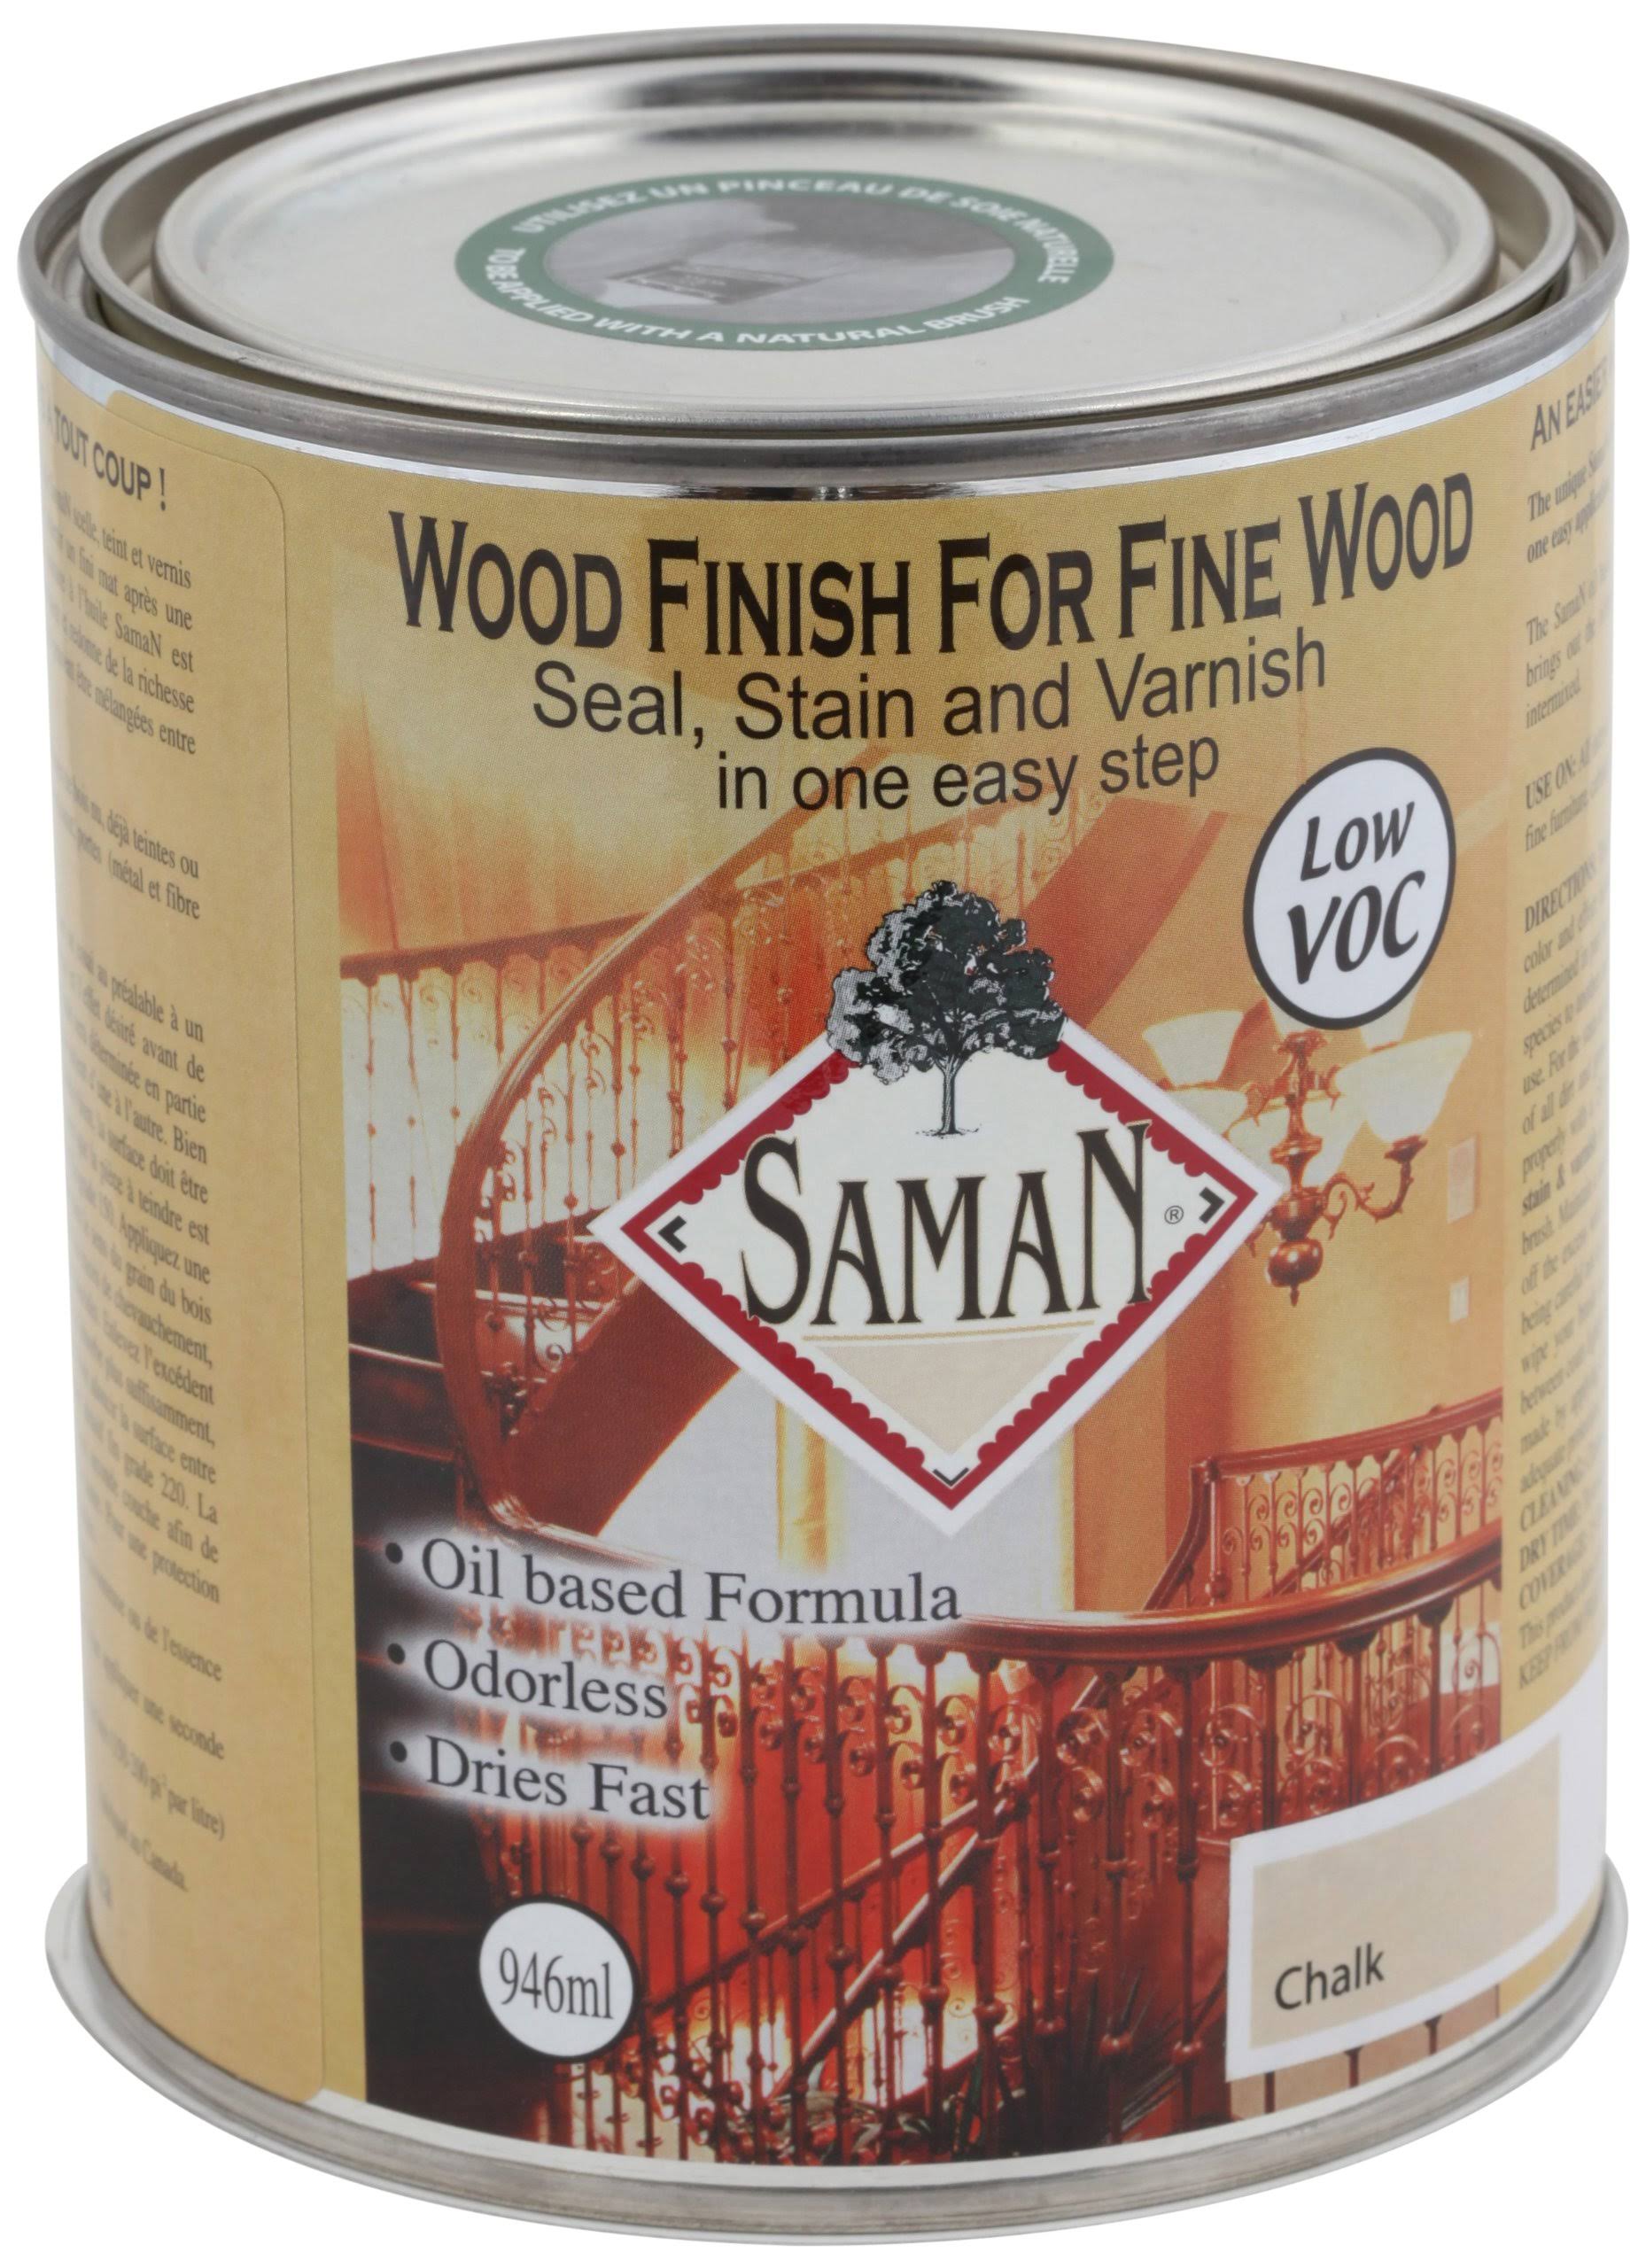 Saman SAM-317-1L 1-Quart Interior Stain for Fine Wood for Seal, Stain and Varnish, Chalk